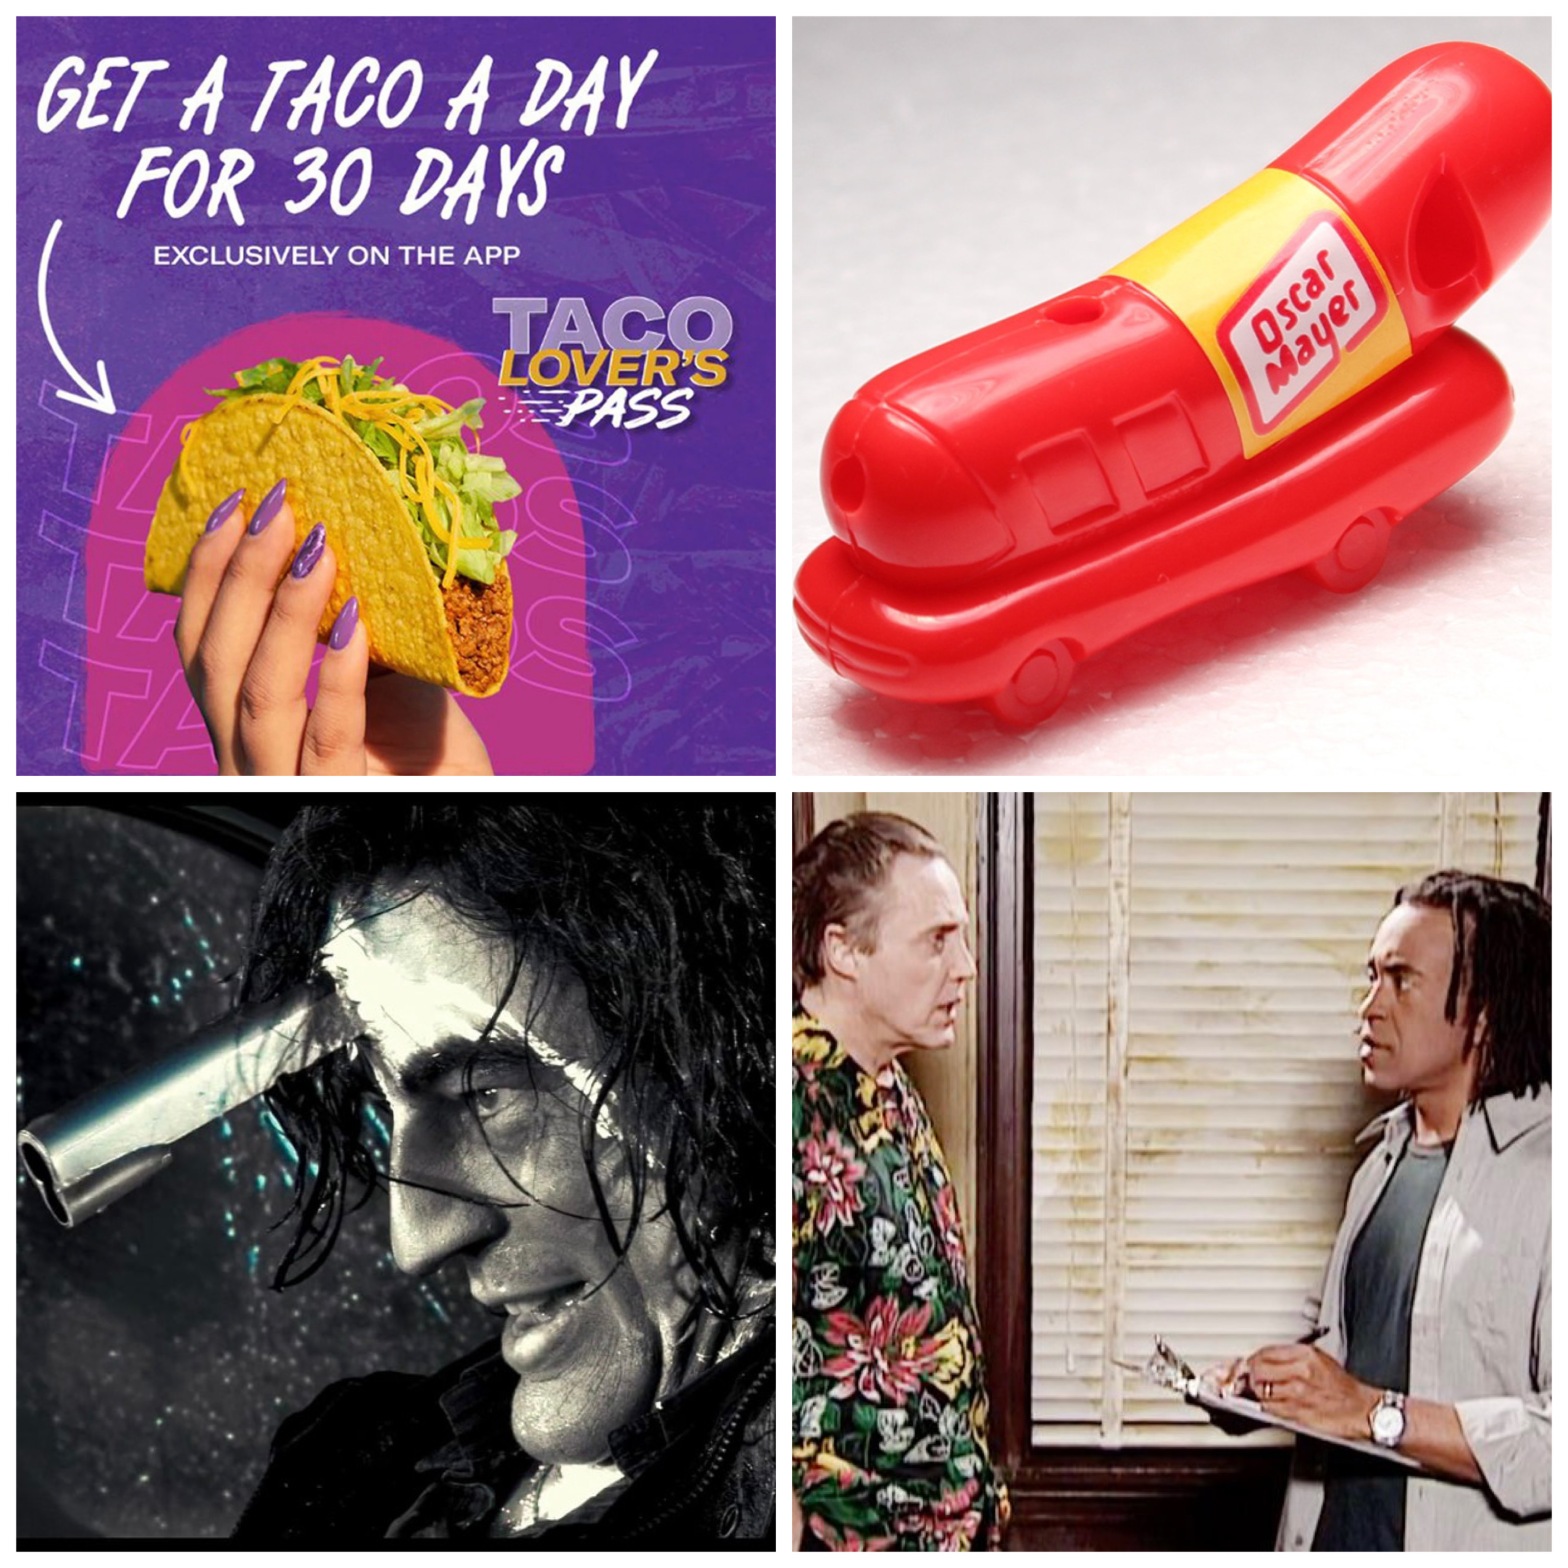 The Taco Lover's Pass from Taco Bell, the Oscar Mayer Weenie Whistle, Benicio del Toro in Sin City, and Christopher Walken and Tim Meadows in The Census sketch from SNL.